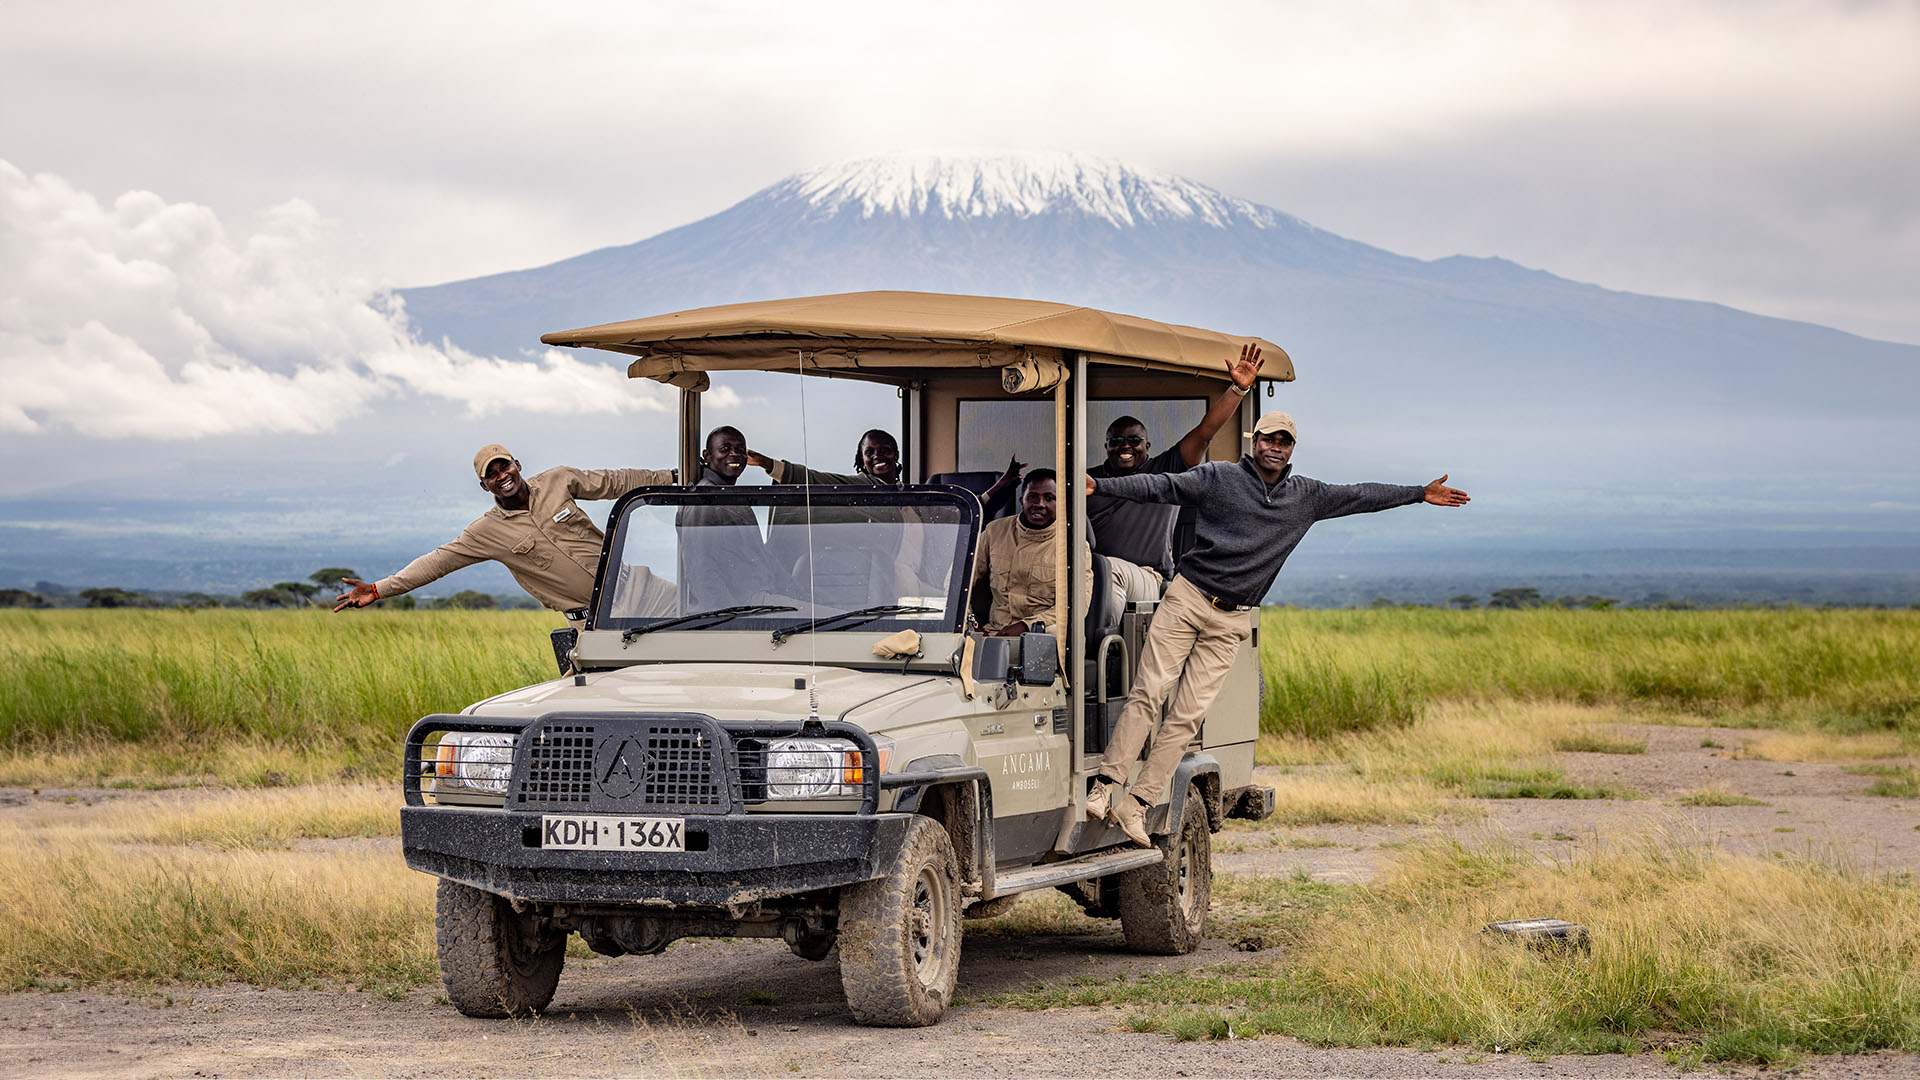 Above: The Amboseli Guiding team shows off their new ride 